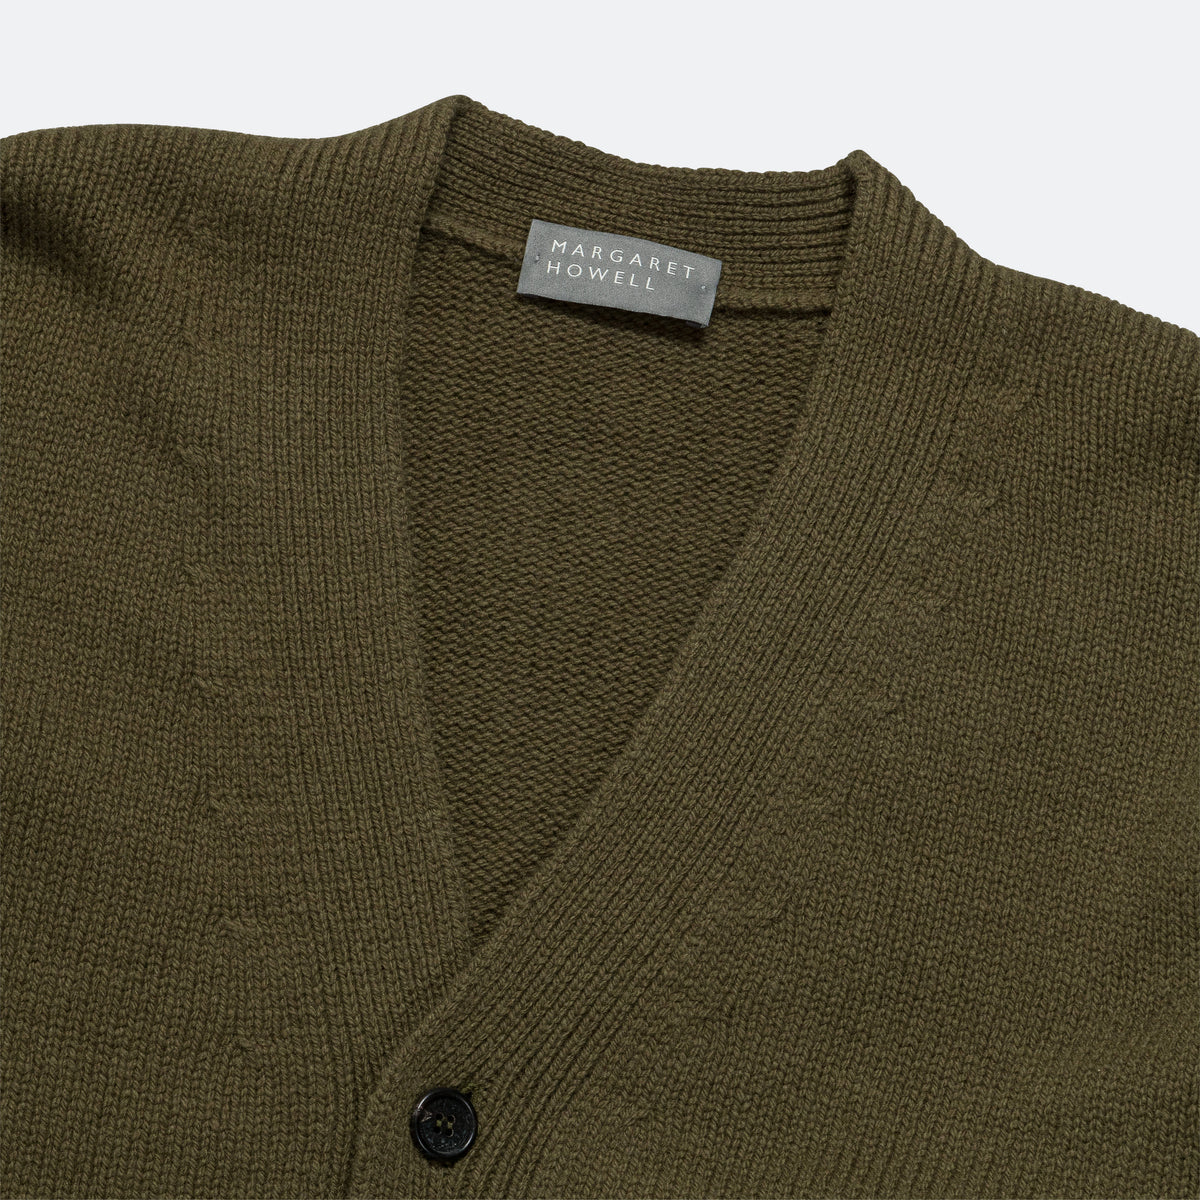 Margaret Howell Boxy Cardigan - Olive Green Geelong Wool